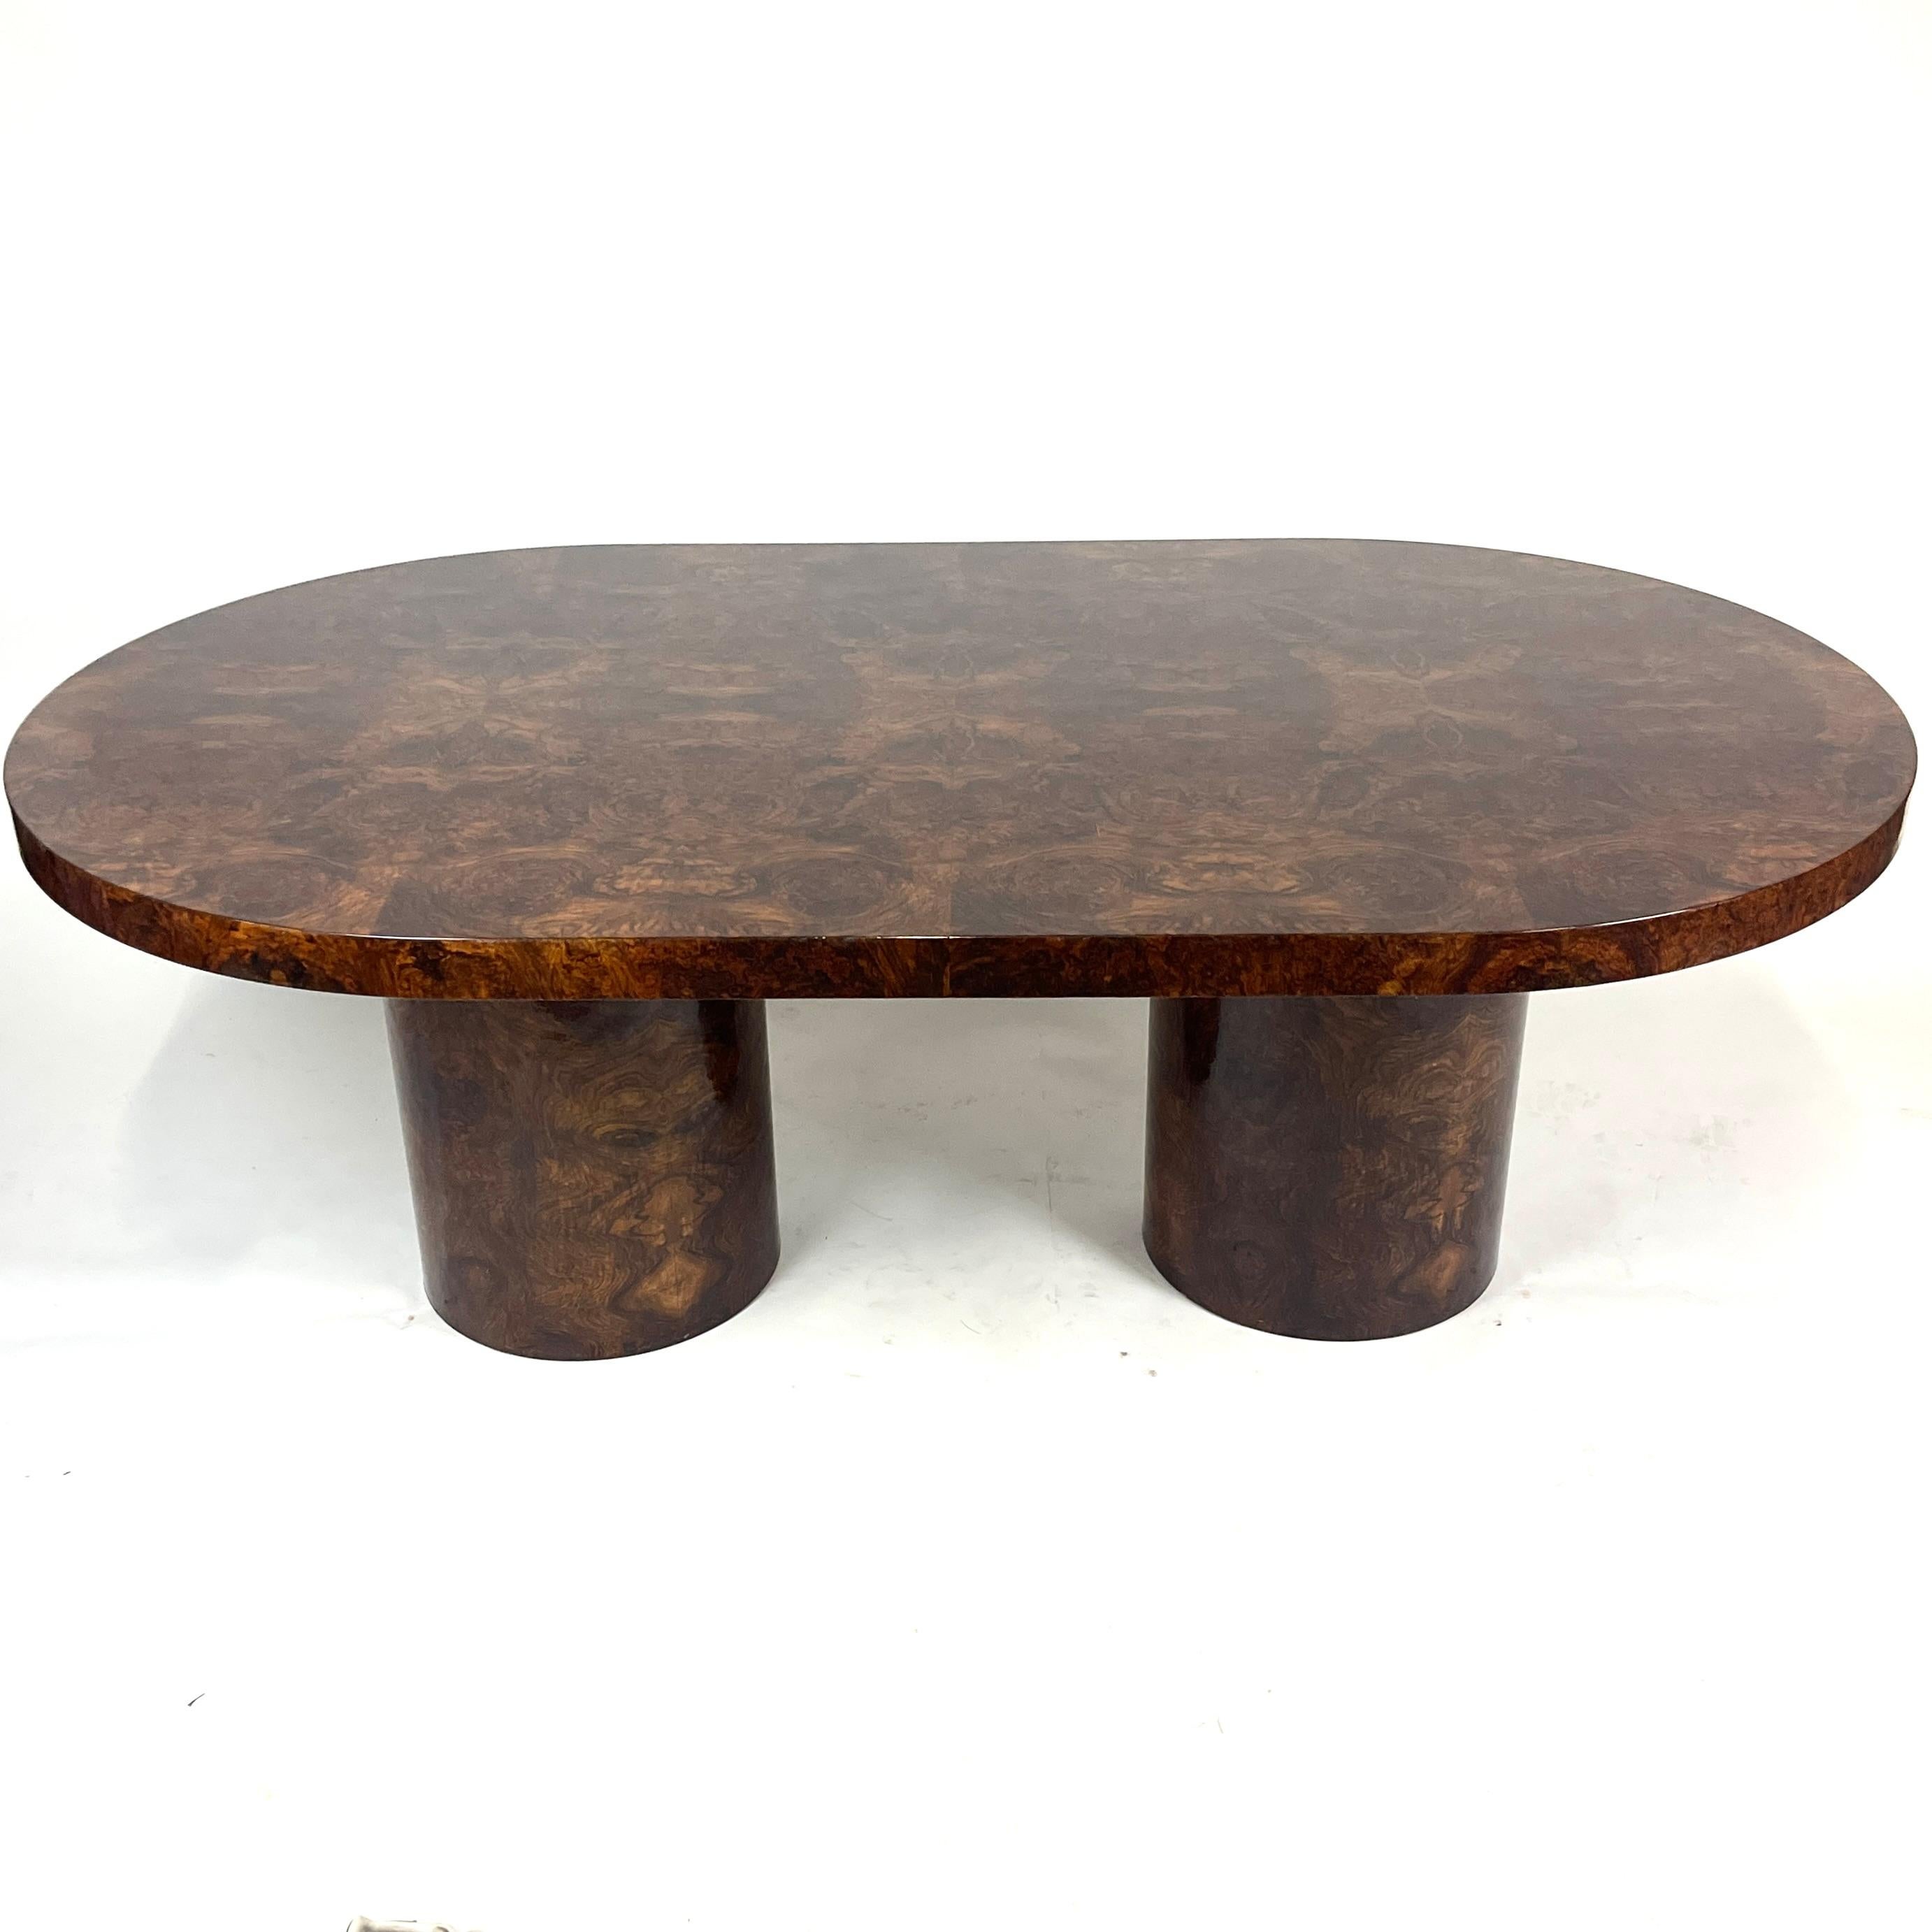 Lacquered Burled Mahogany Oval Dining Table by Paul Mayen for Intrex Habitat 5